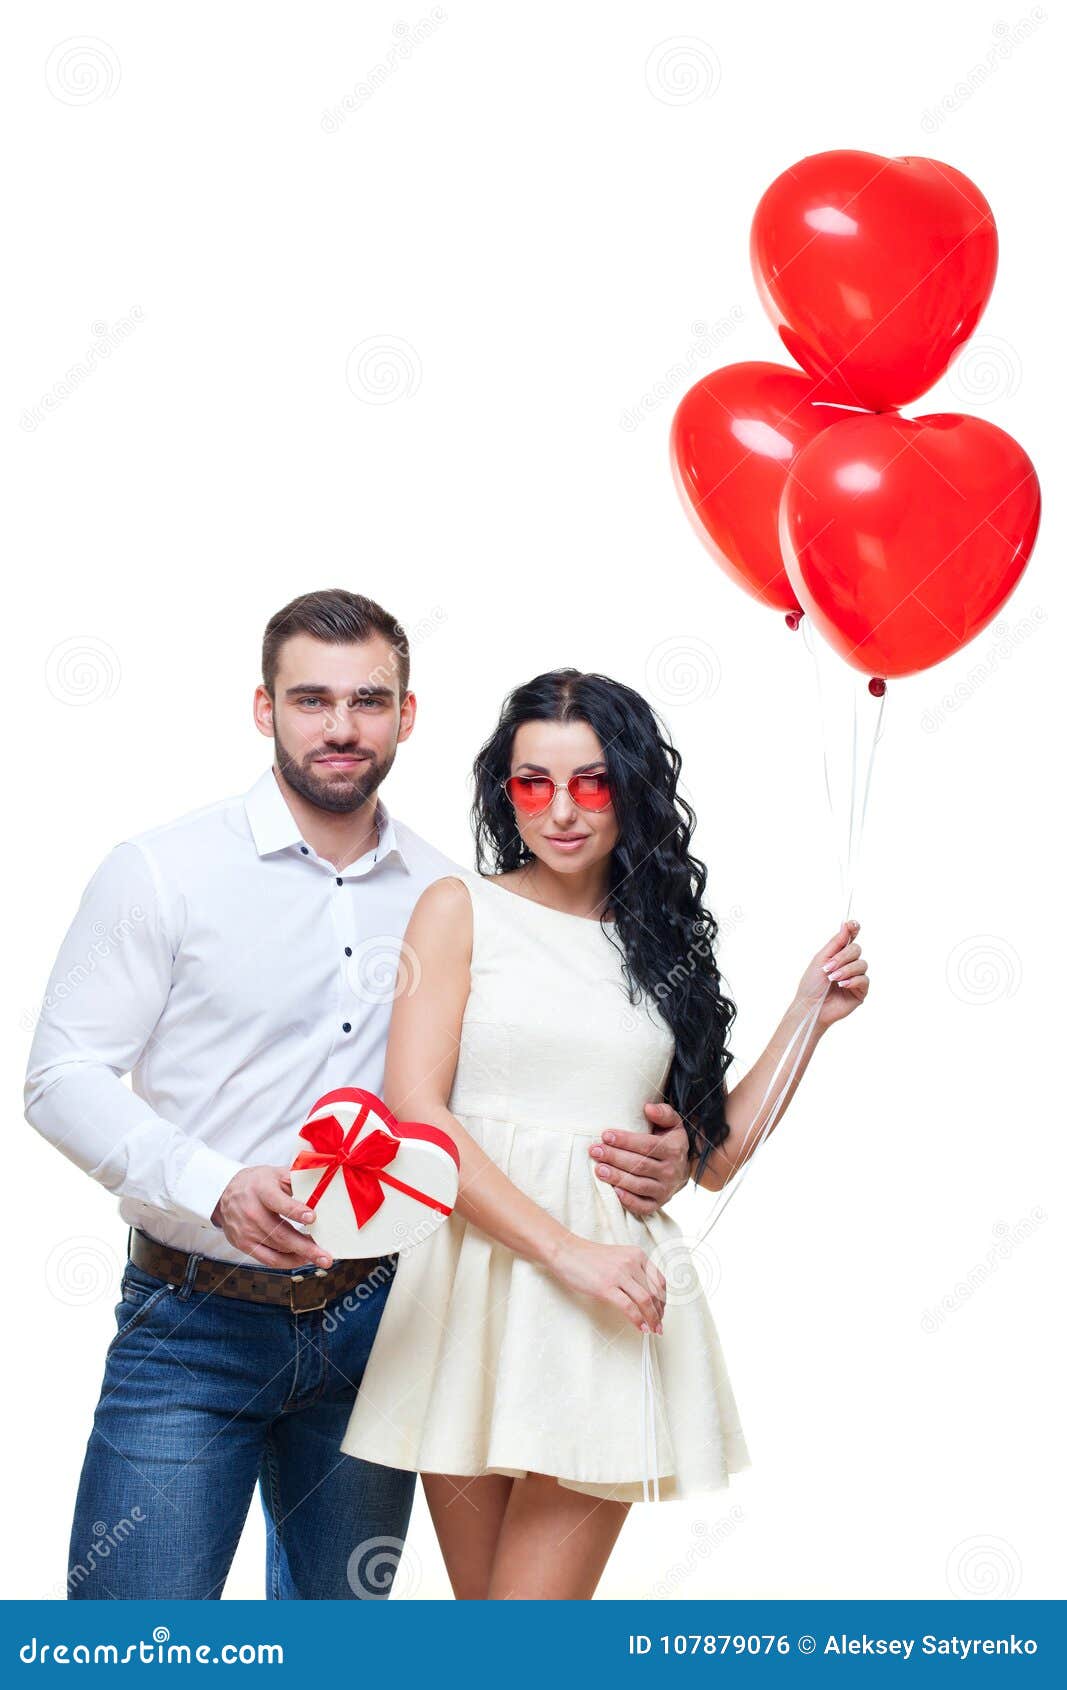 Handsome Elegant Guy Is Presenting A Heart Shaped T And Balloons To His Beautiful Girlfriend